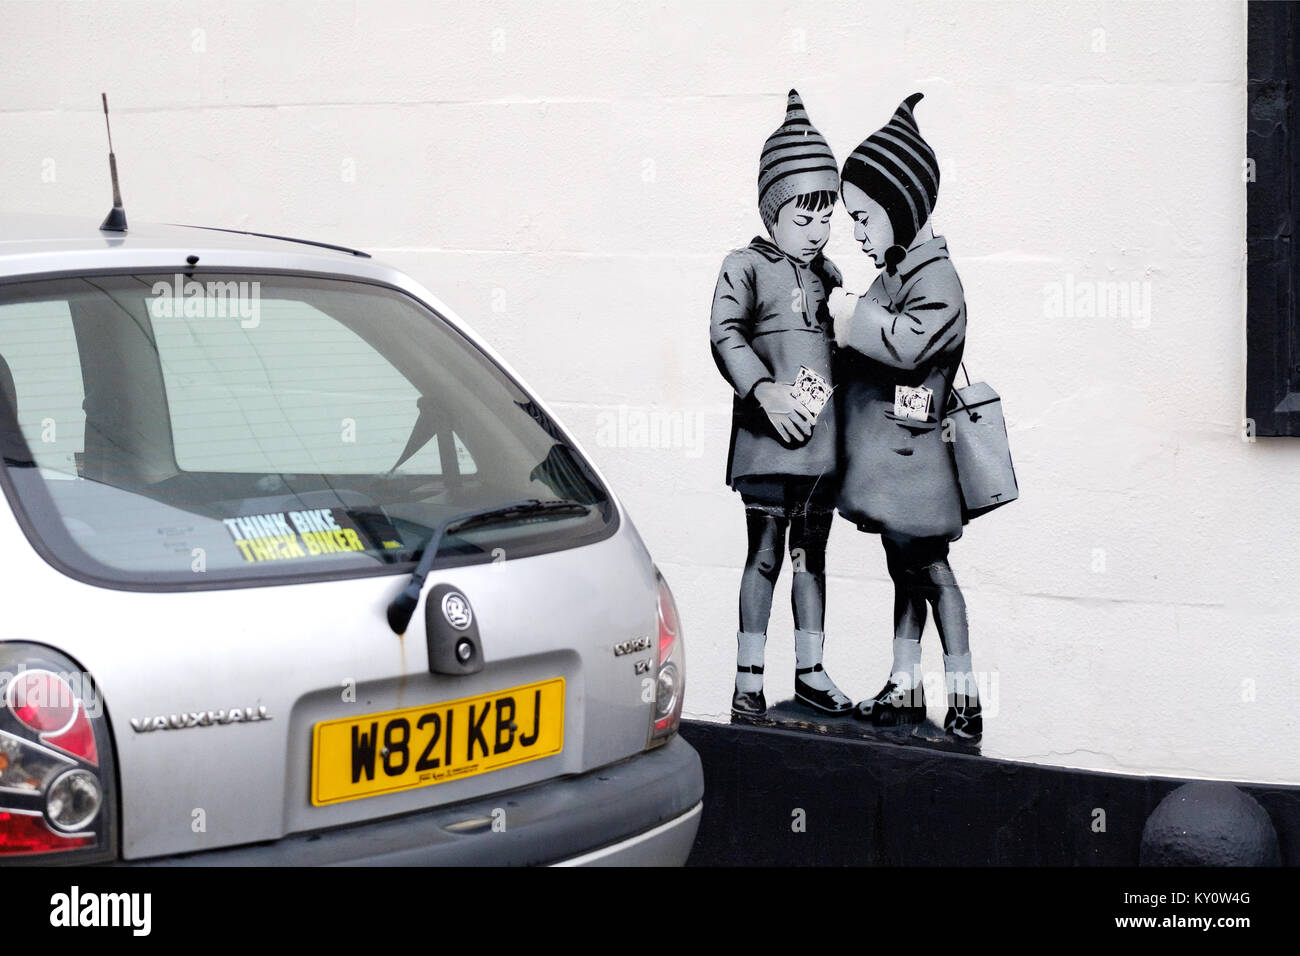 A banksy inspired stenciled artwork called The Big Deal on the wall of a pub in Weston super Mare, UK. Created by renown local graffiti artist JPS. Stock Photo